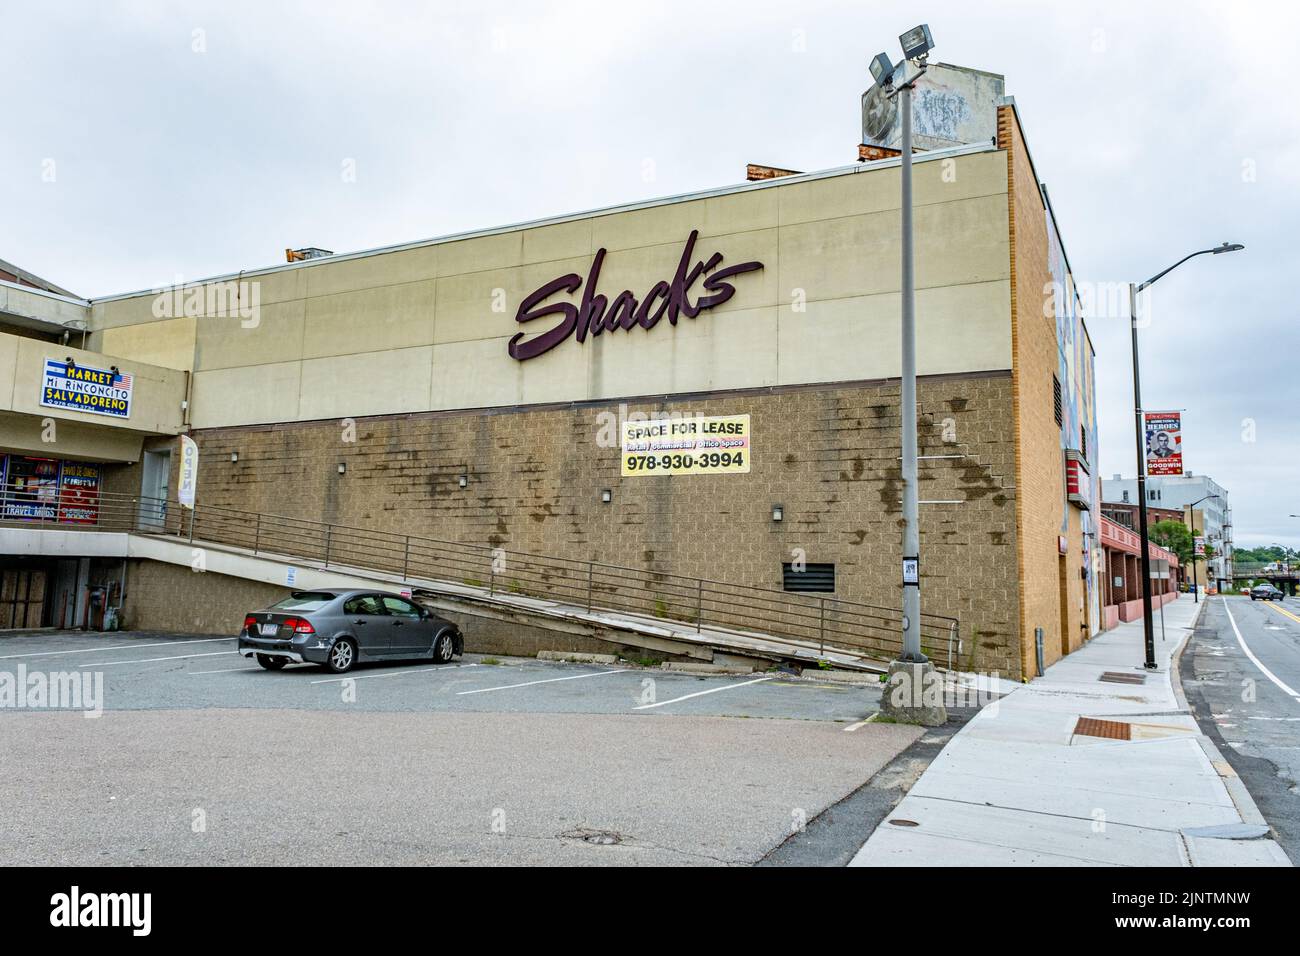 Buildings in downtown Fitchburg, Massachusetts - Shacks a clothing store now closed Stock Photo